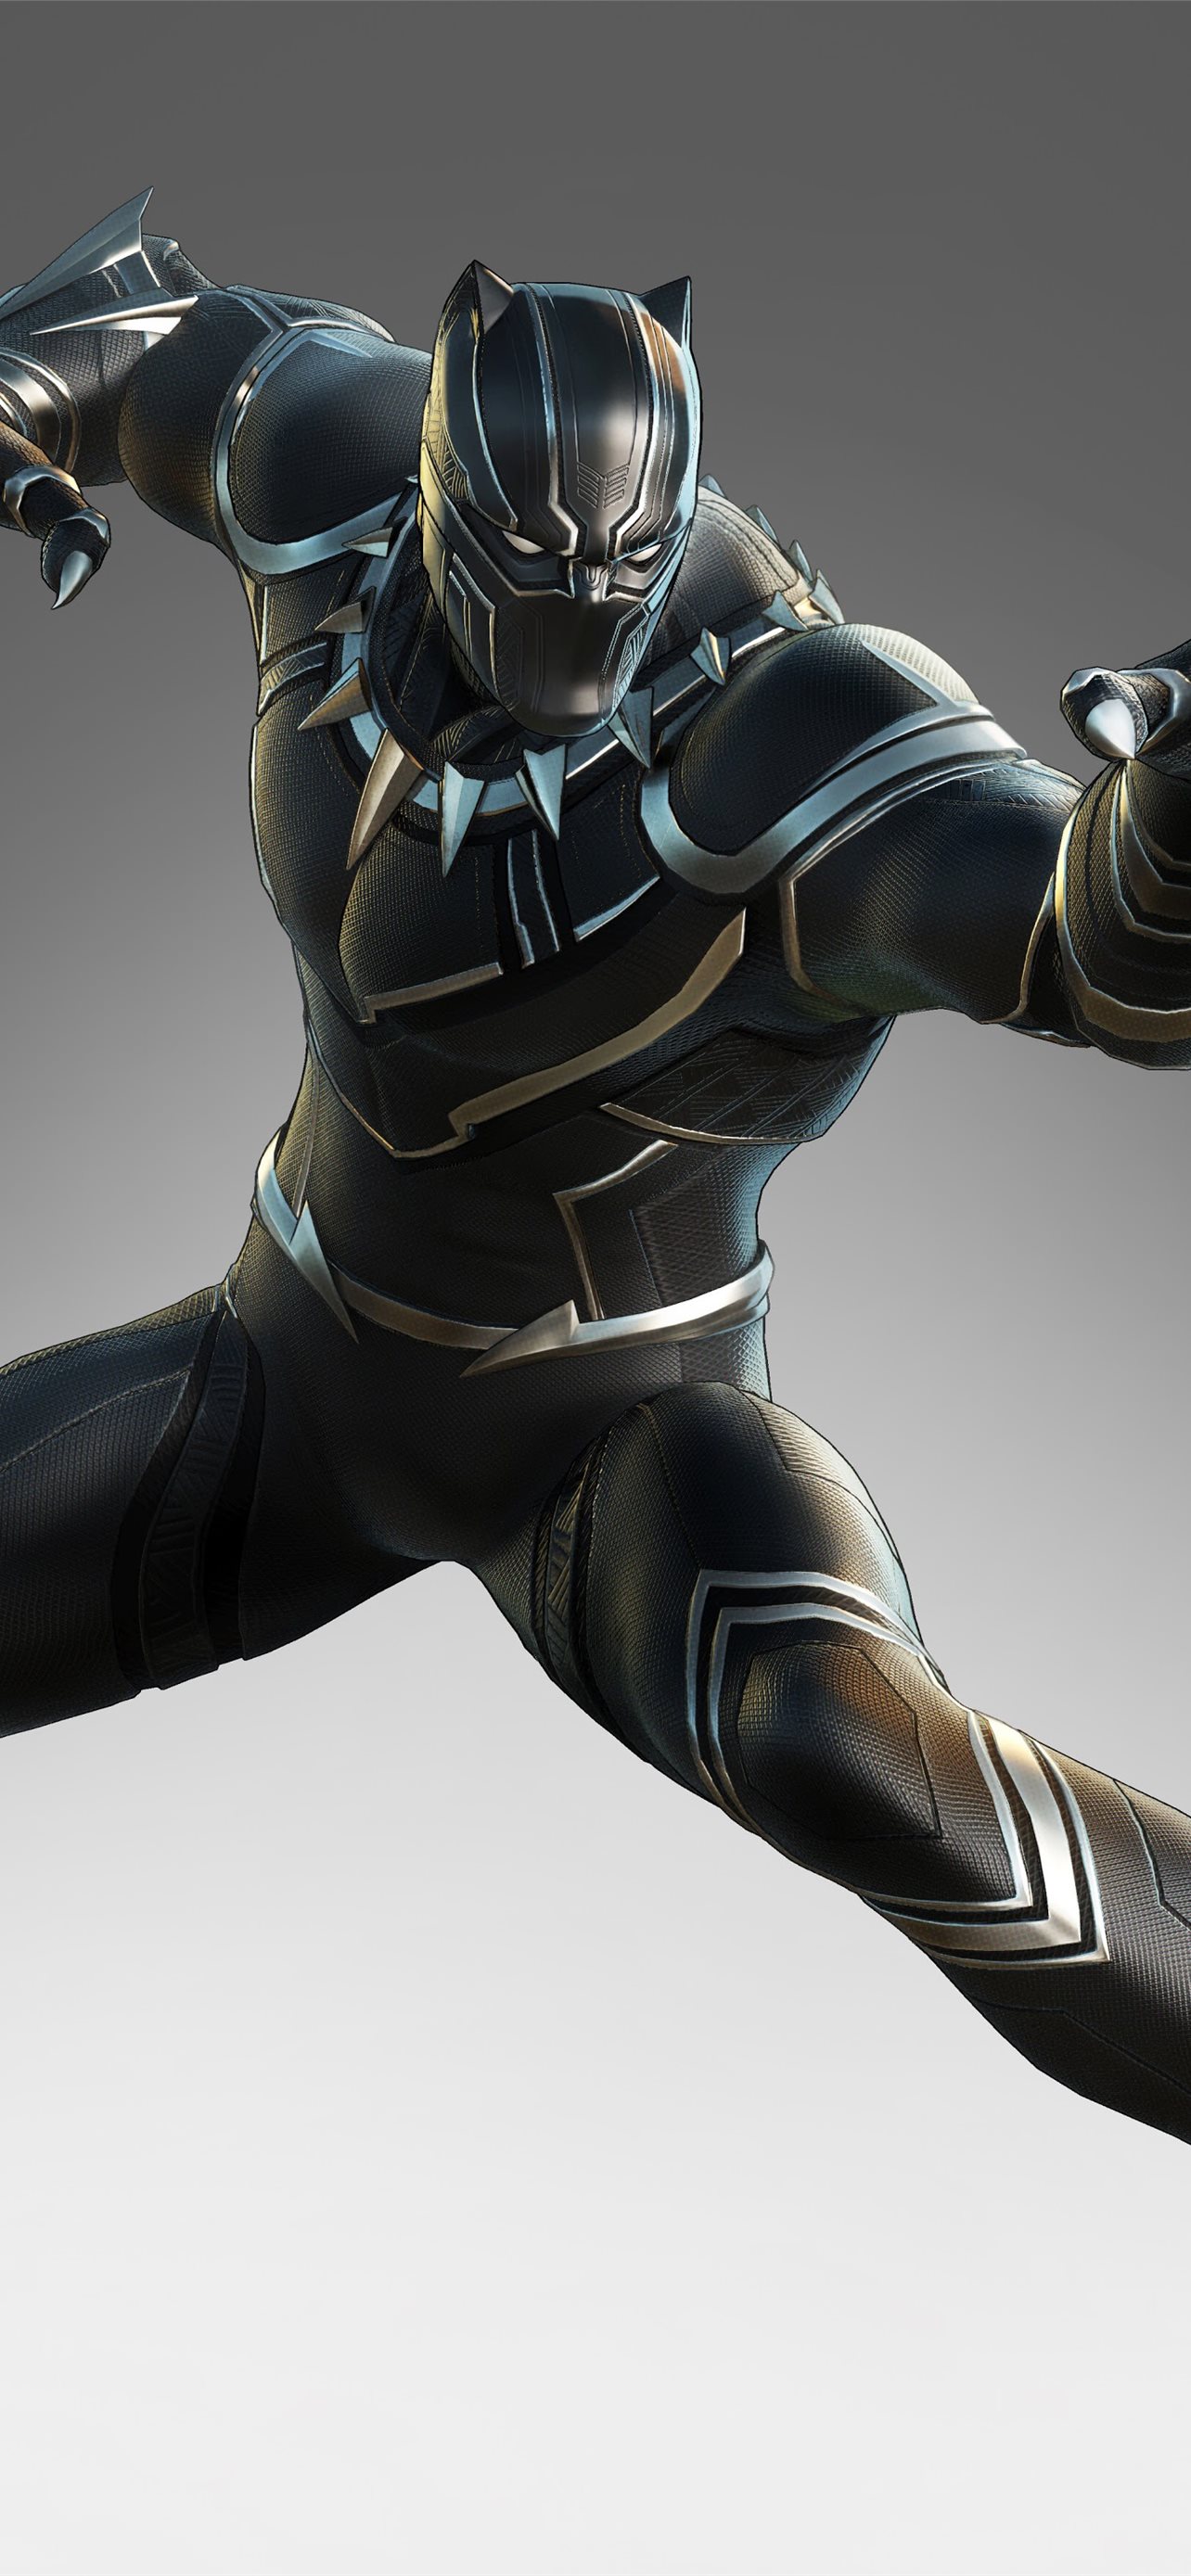 Black Panther Marvel Ultimate Alliance 3 8K iPhone Wallpapers Free Download